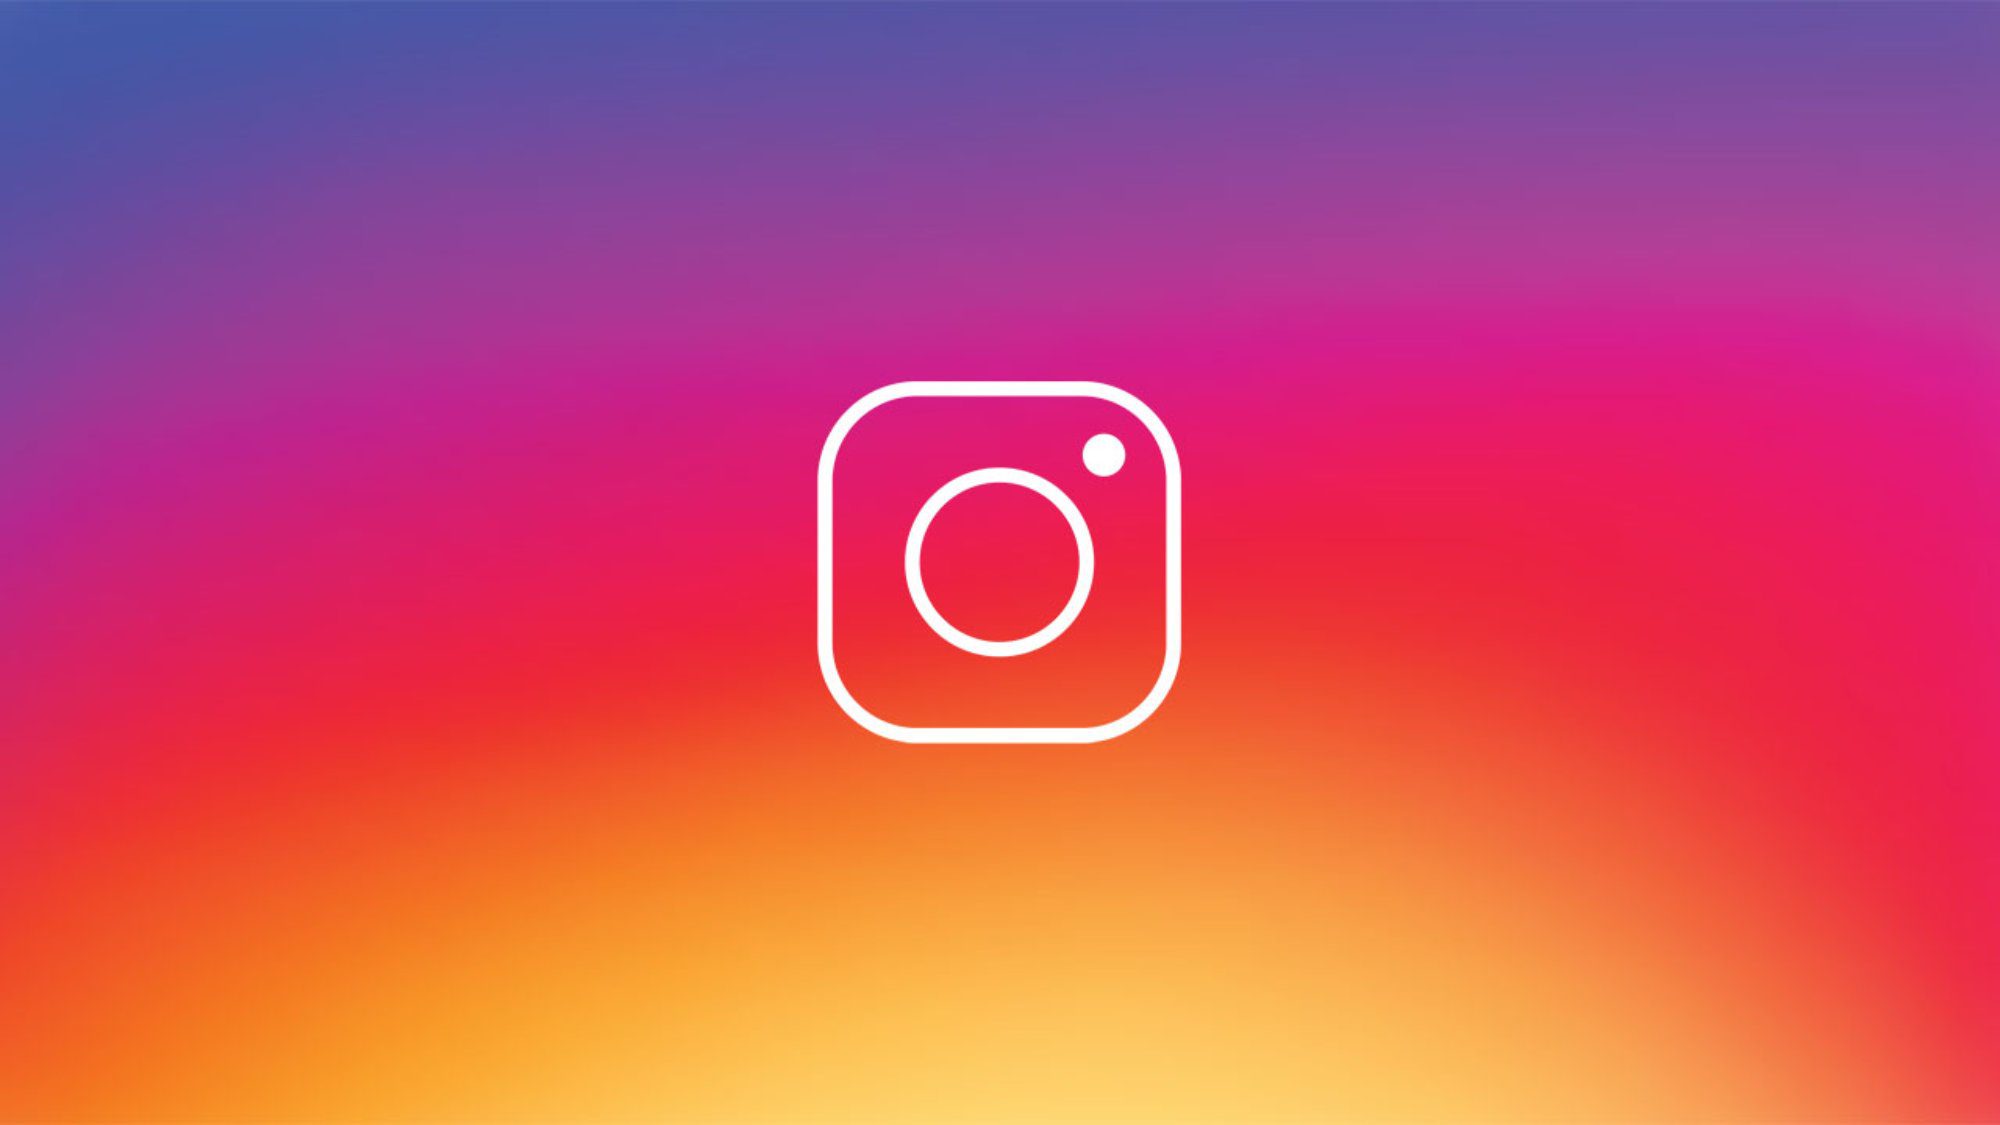 New Ways to Interact on Instagram